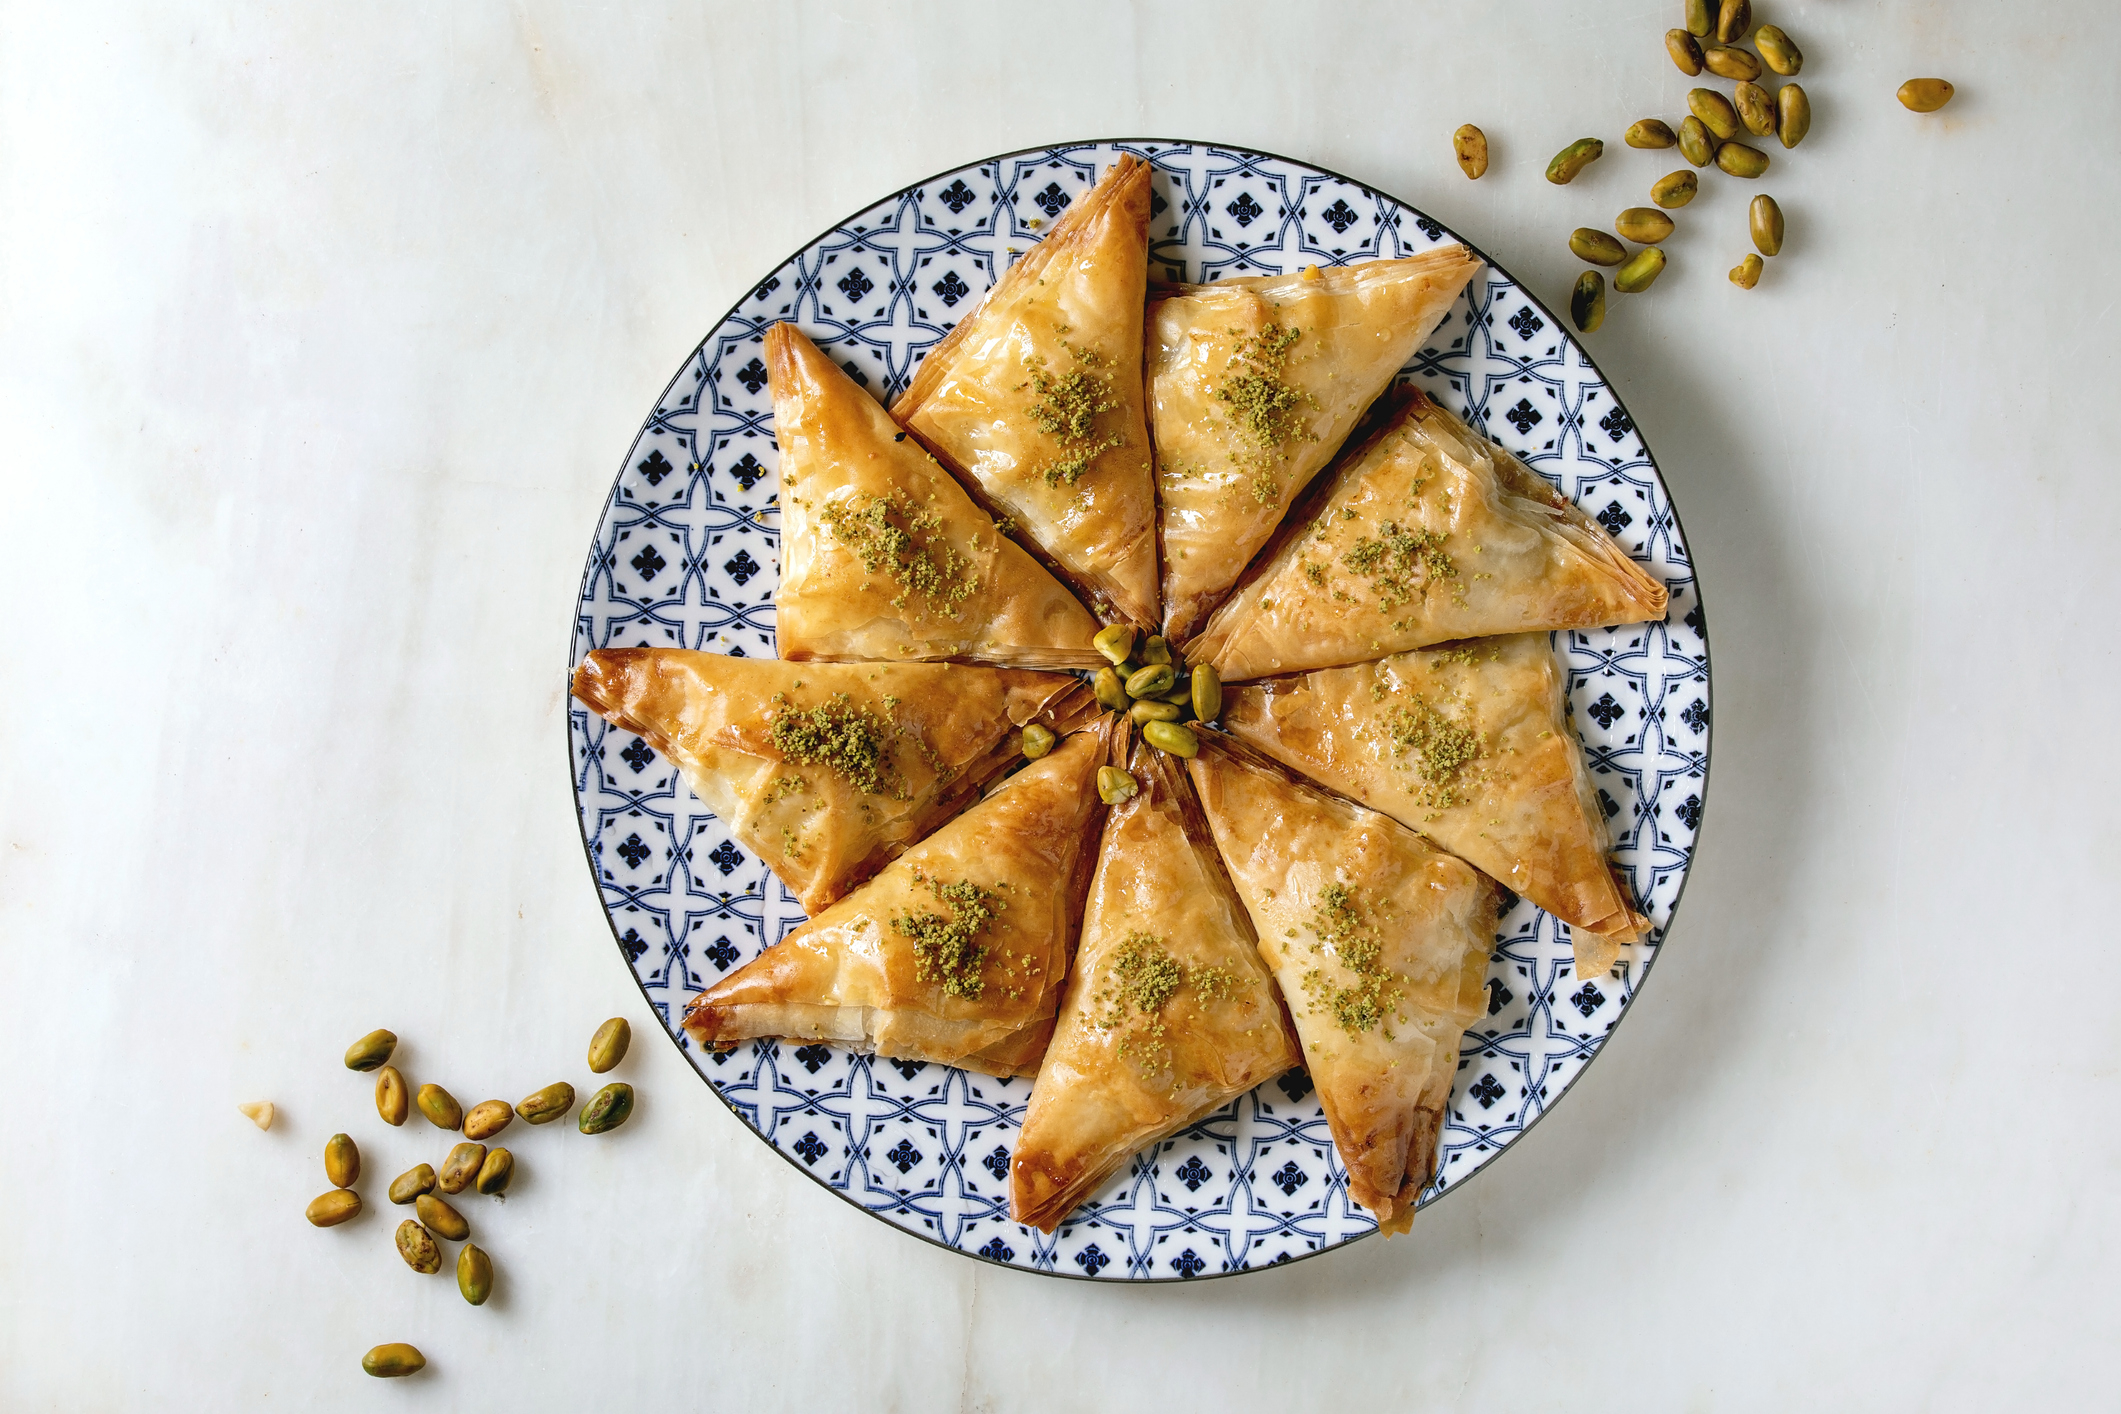 A plate of triangular pastries arranged in a star pattern, garnished with pistachios